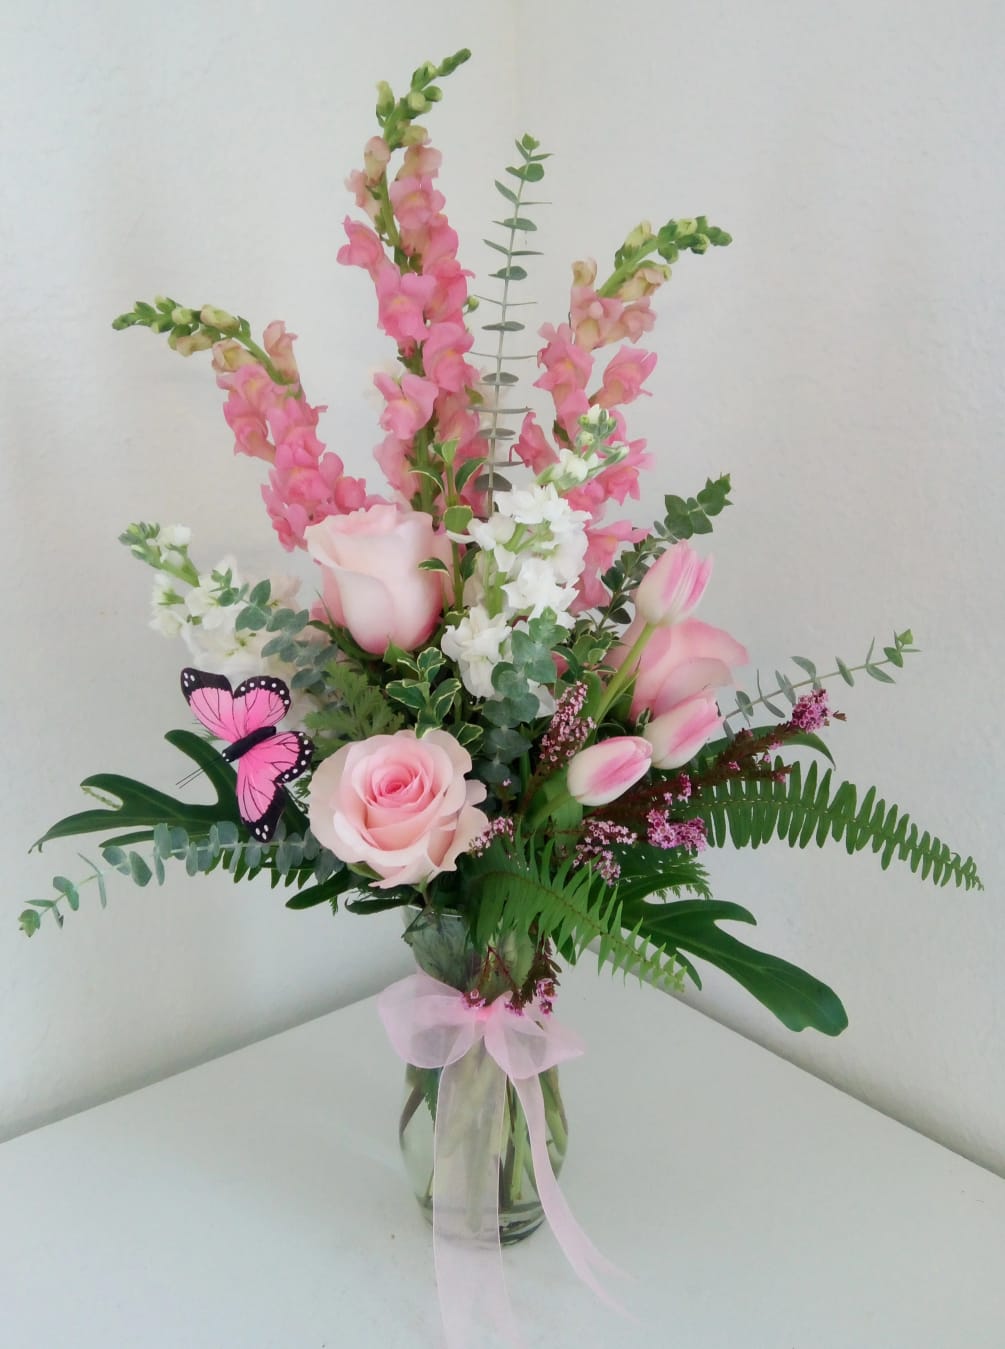 Pinks and whites arranged in a tall clear vase